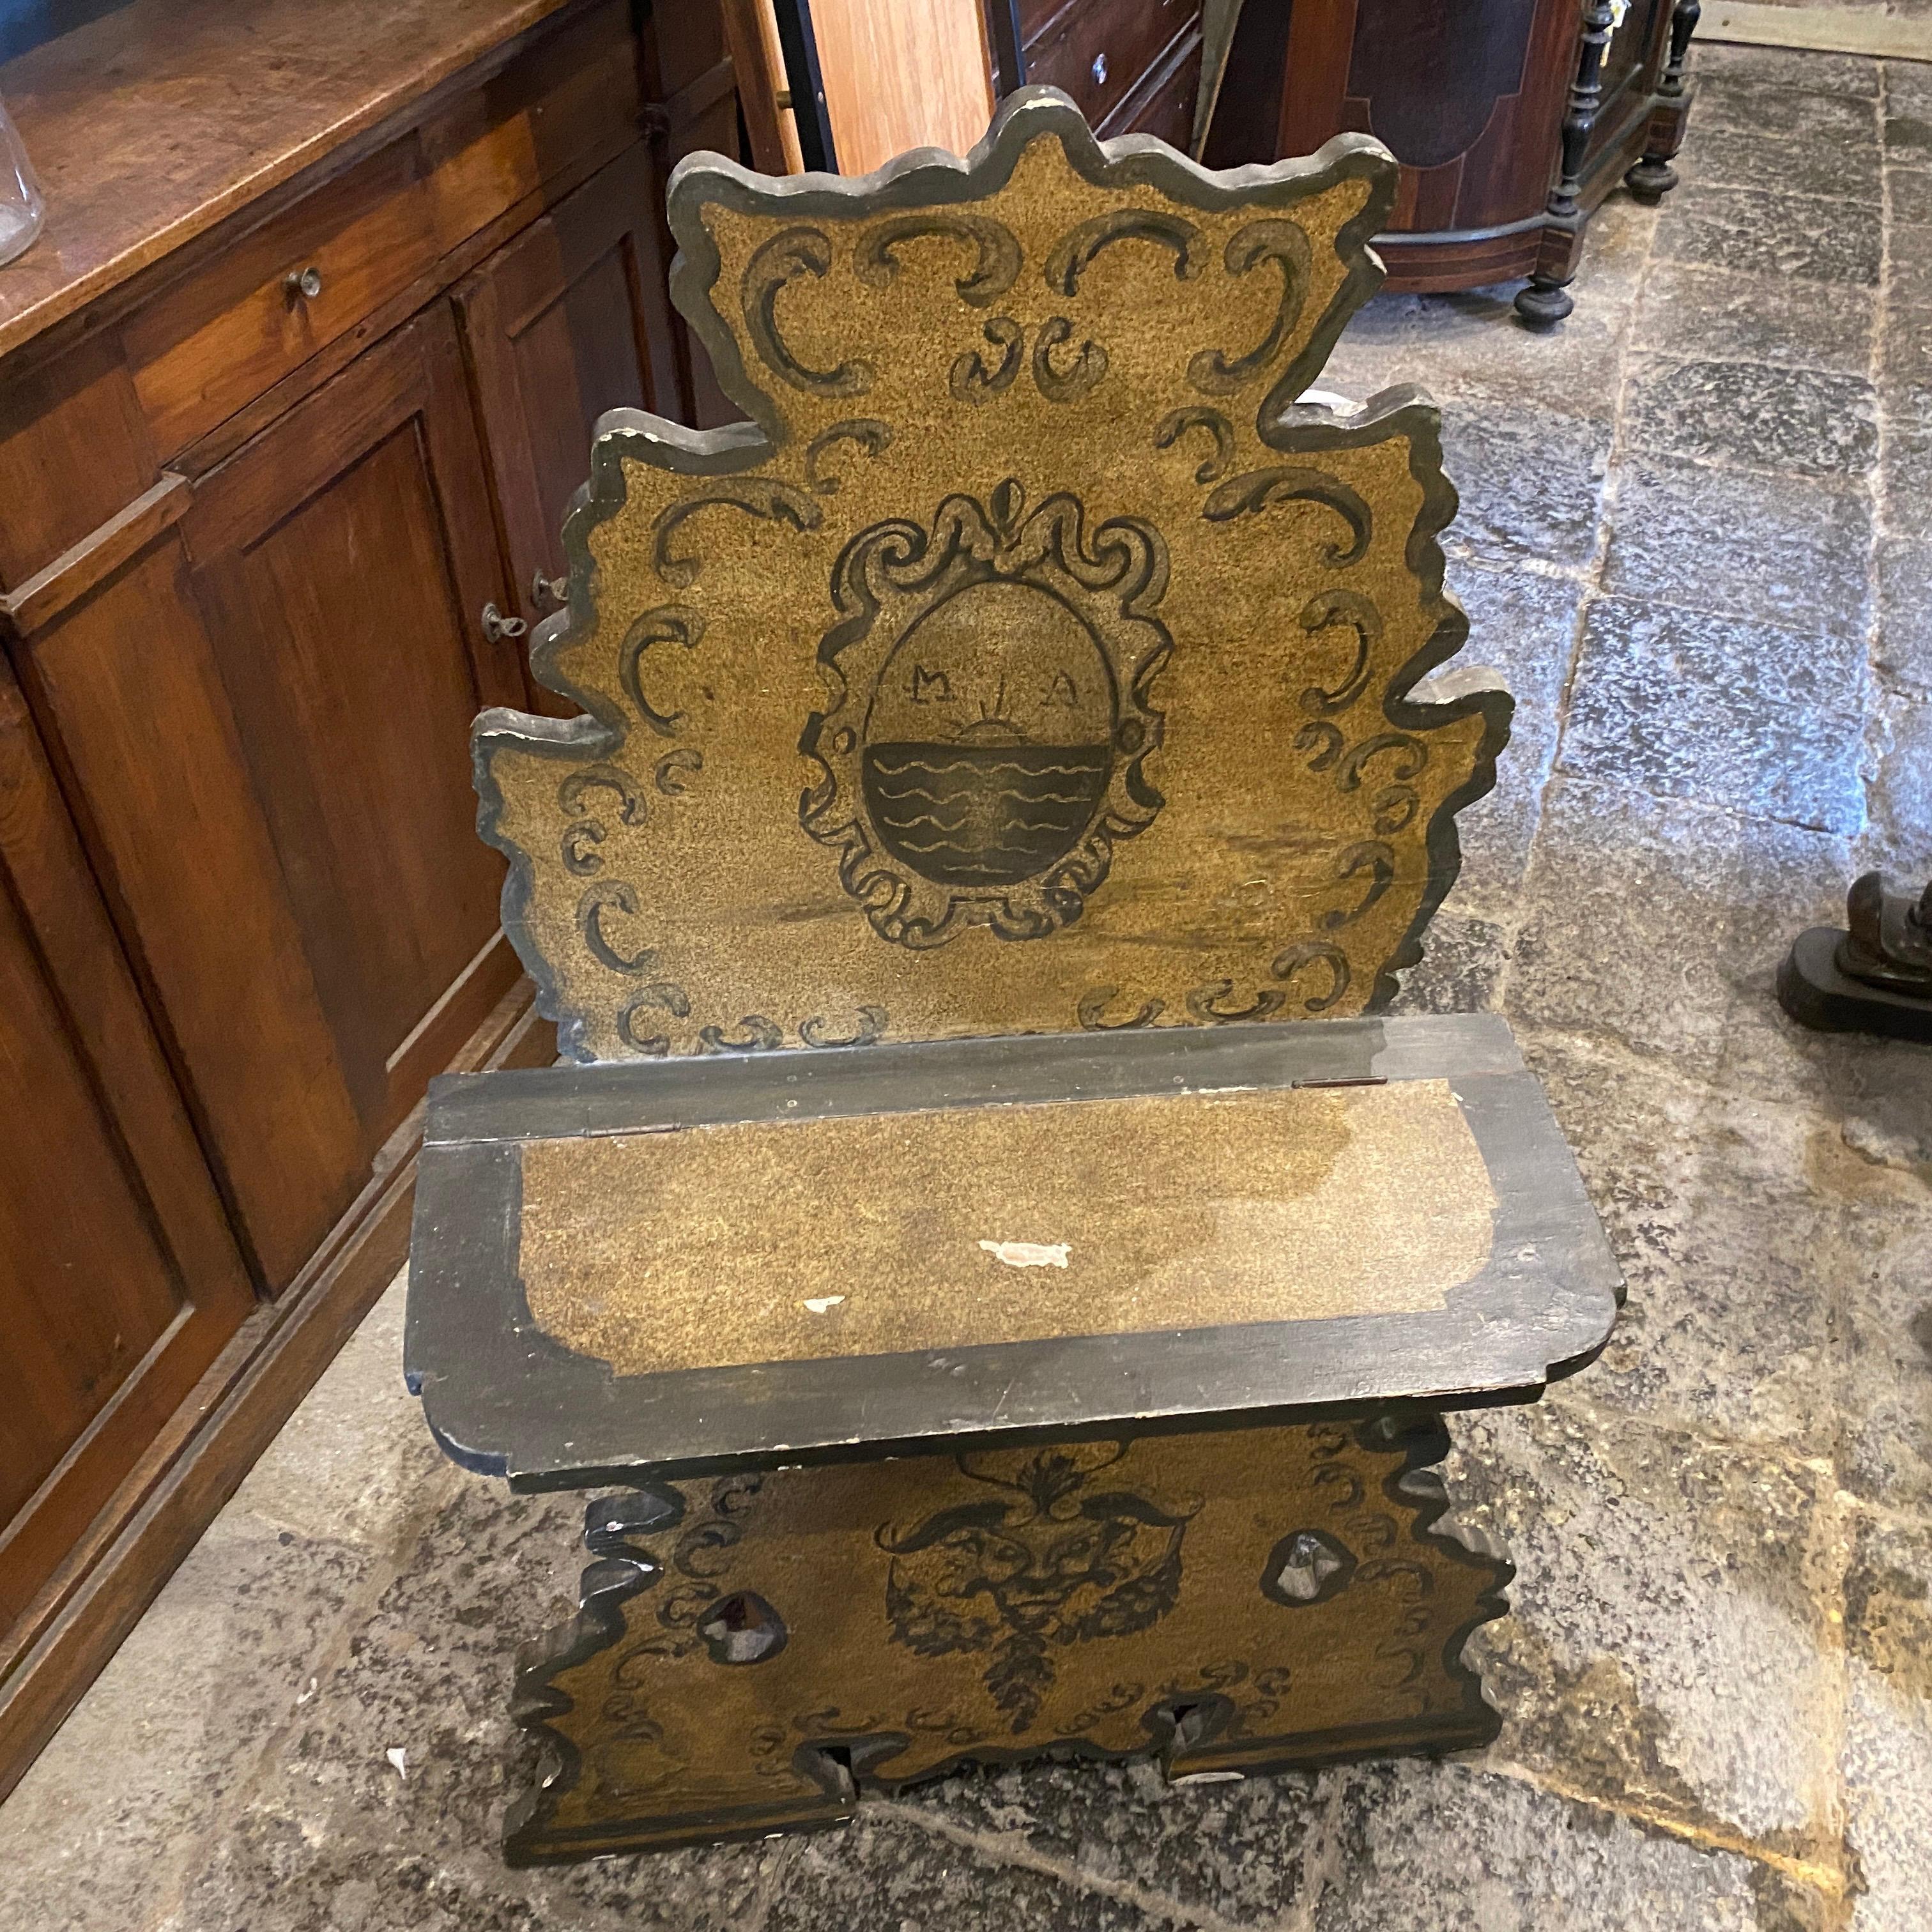 A rare bench made in Italy in late 19th century, it's decorated on green tones with a noble coat of arms. It's in good conditions considering the age.